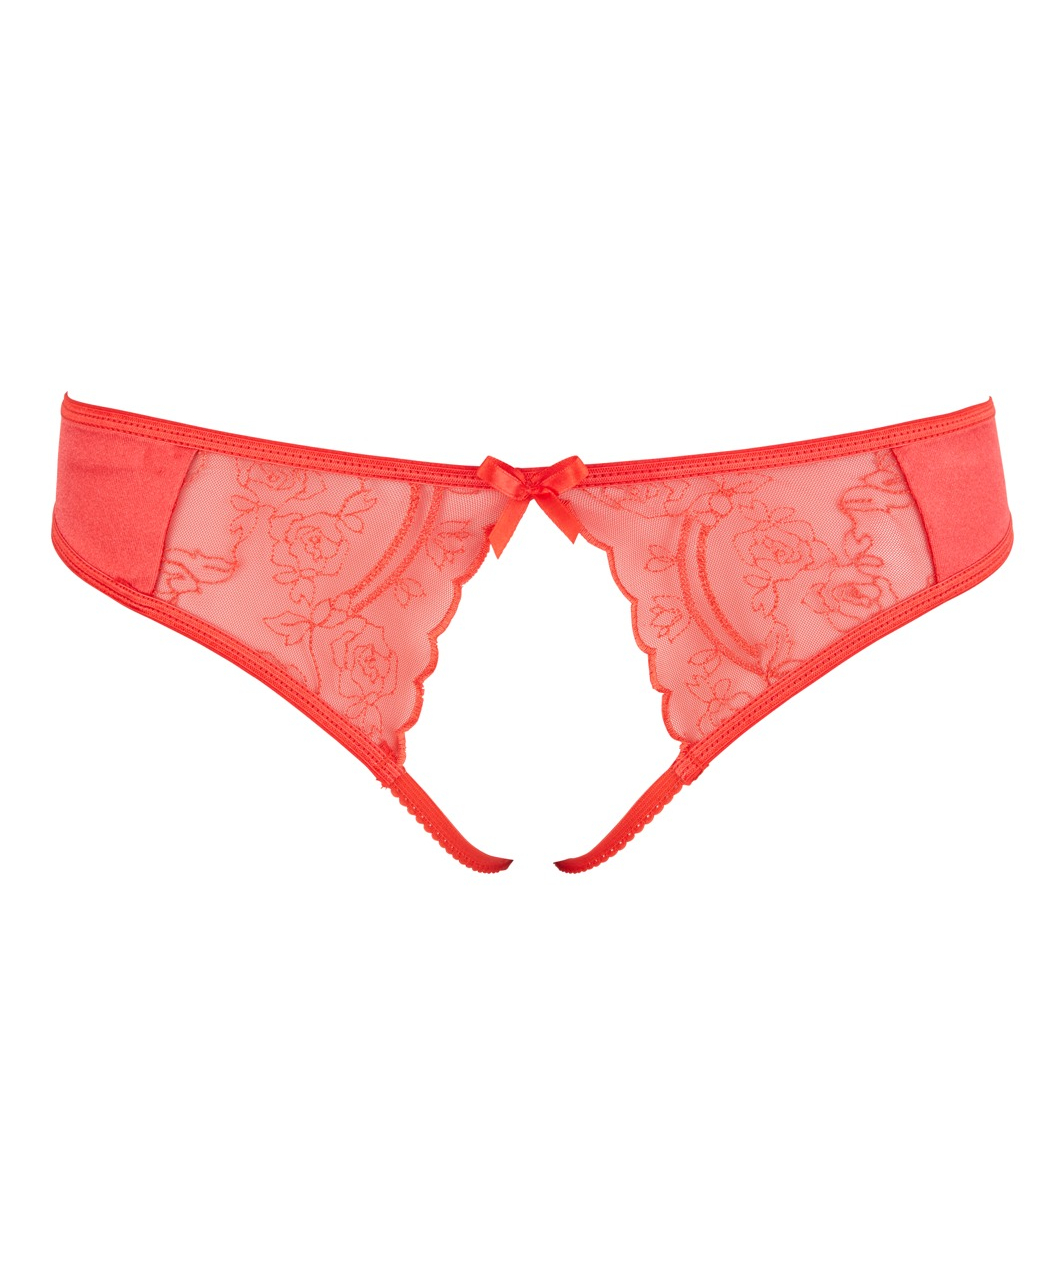 Cottelli Lingerie red string with embroidery